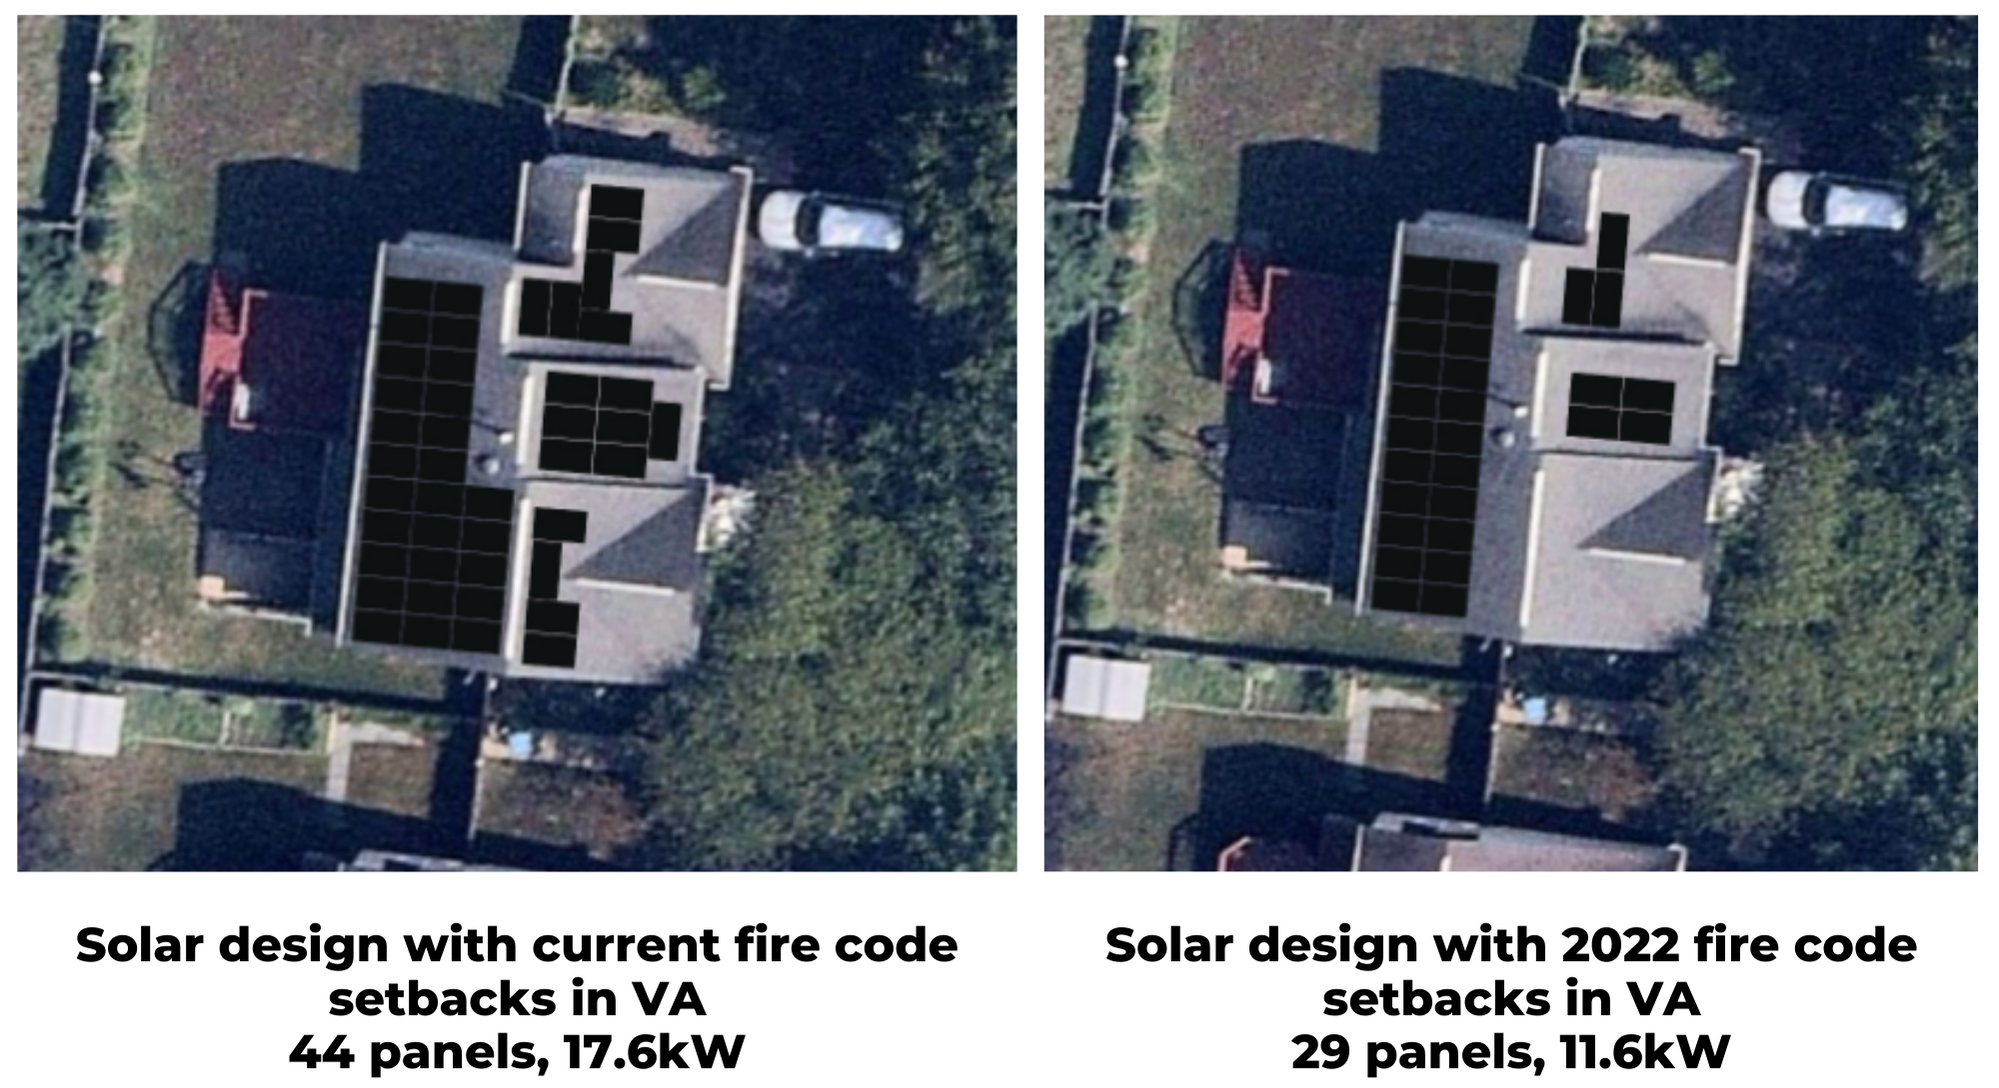 Solar design with fire code setbacks current and 2022 in VA